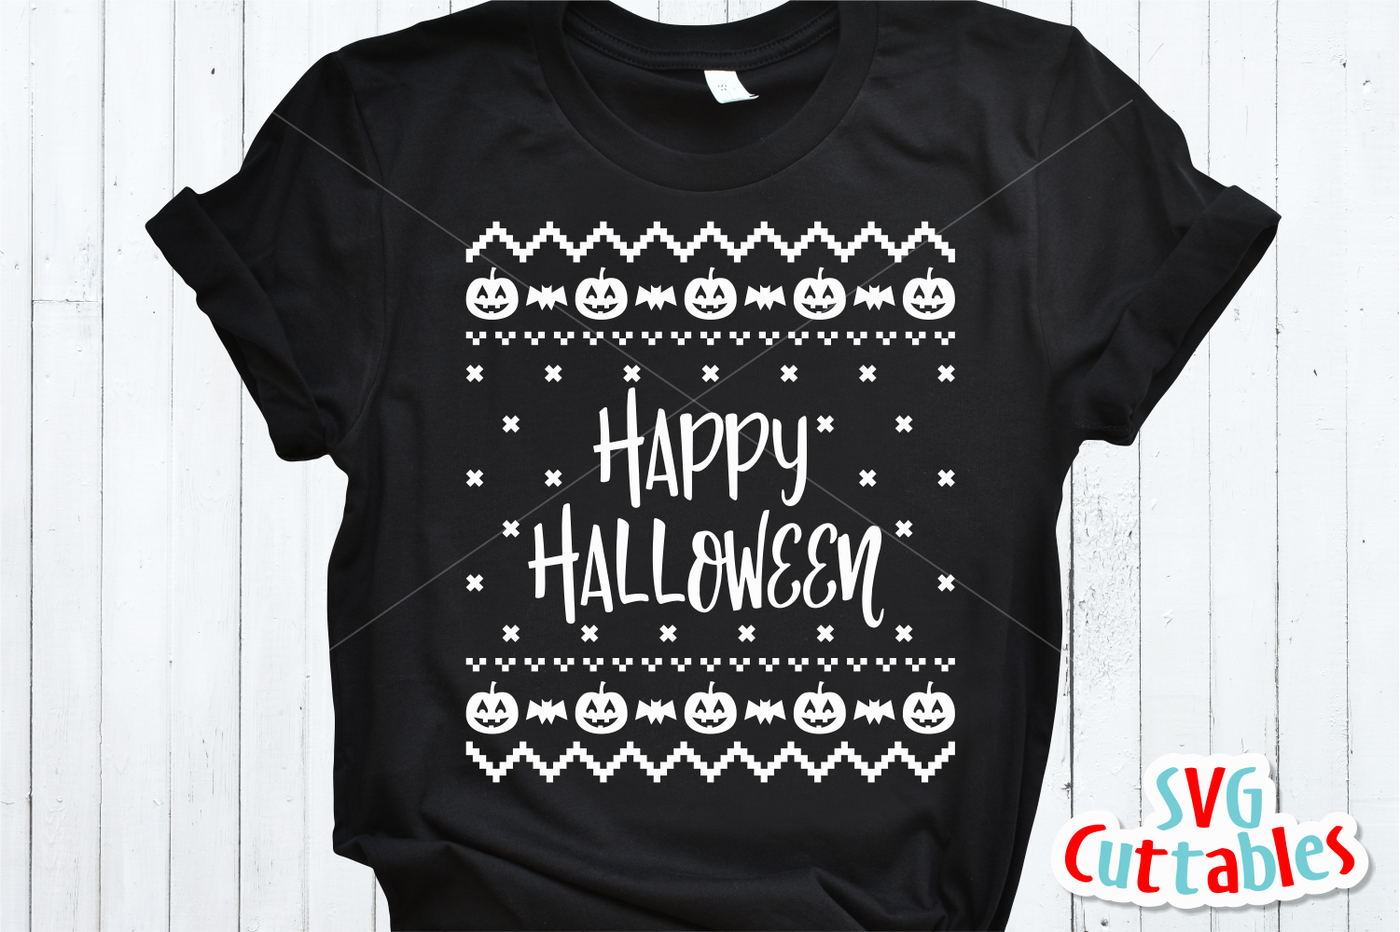 Happy Halloween Sweater Svg Cut File By Svg Cuttables Thehungryjpeg Com